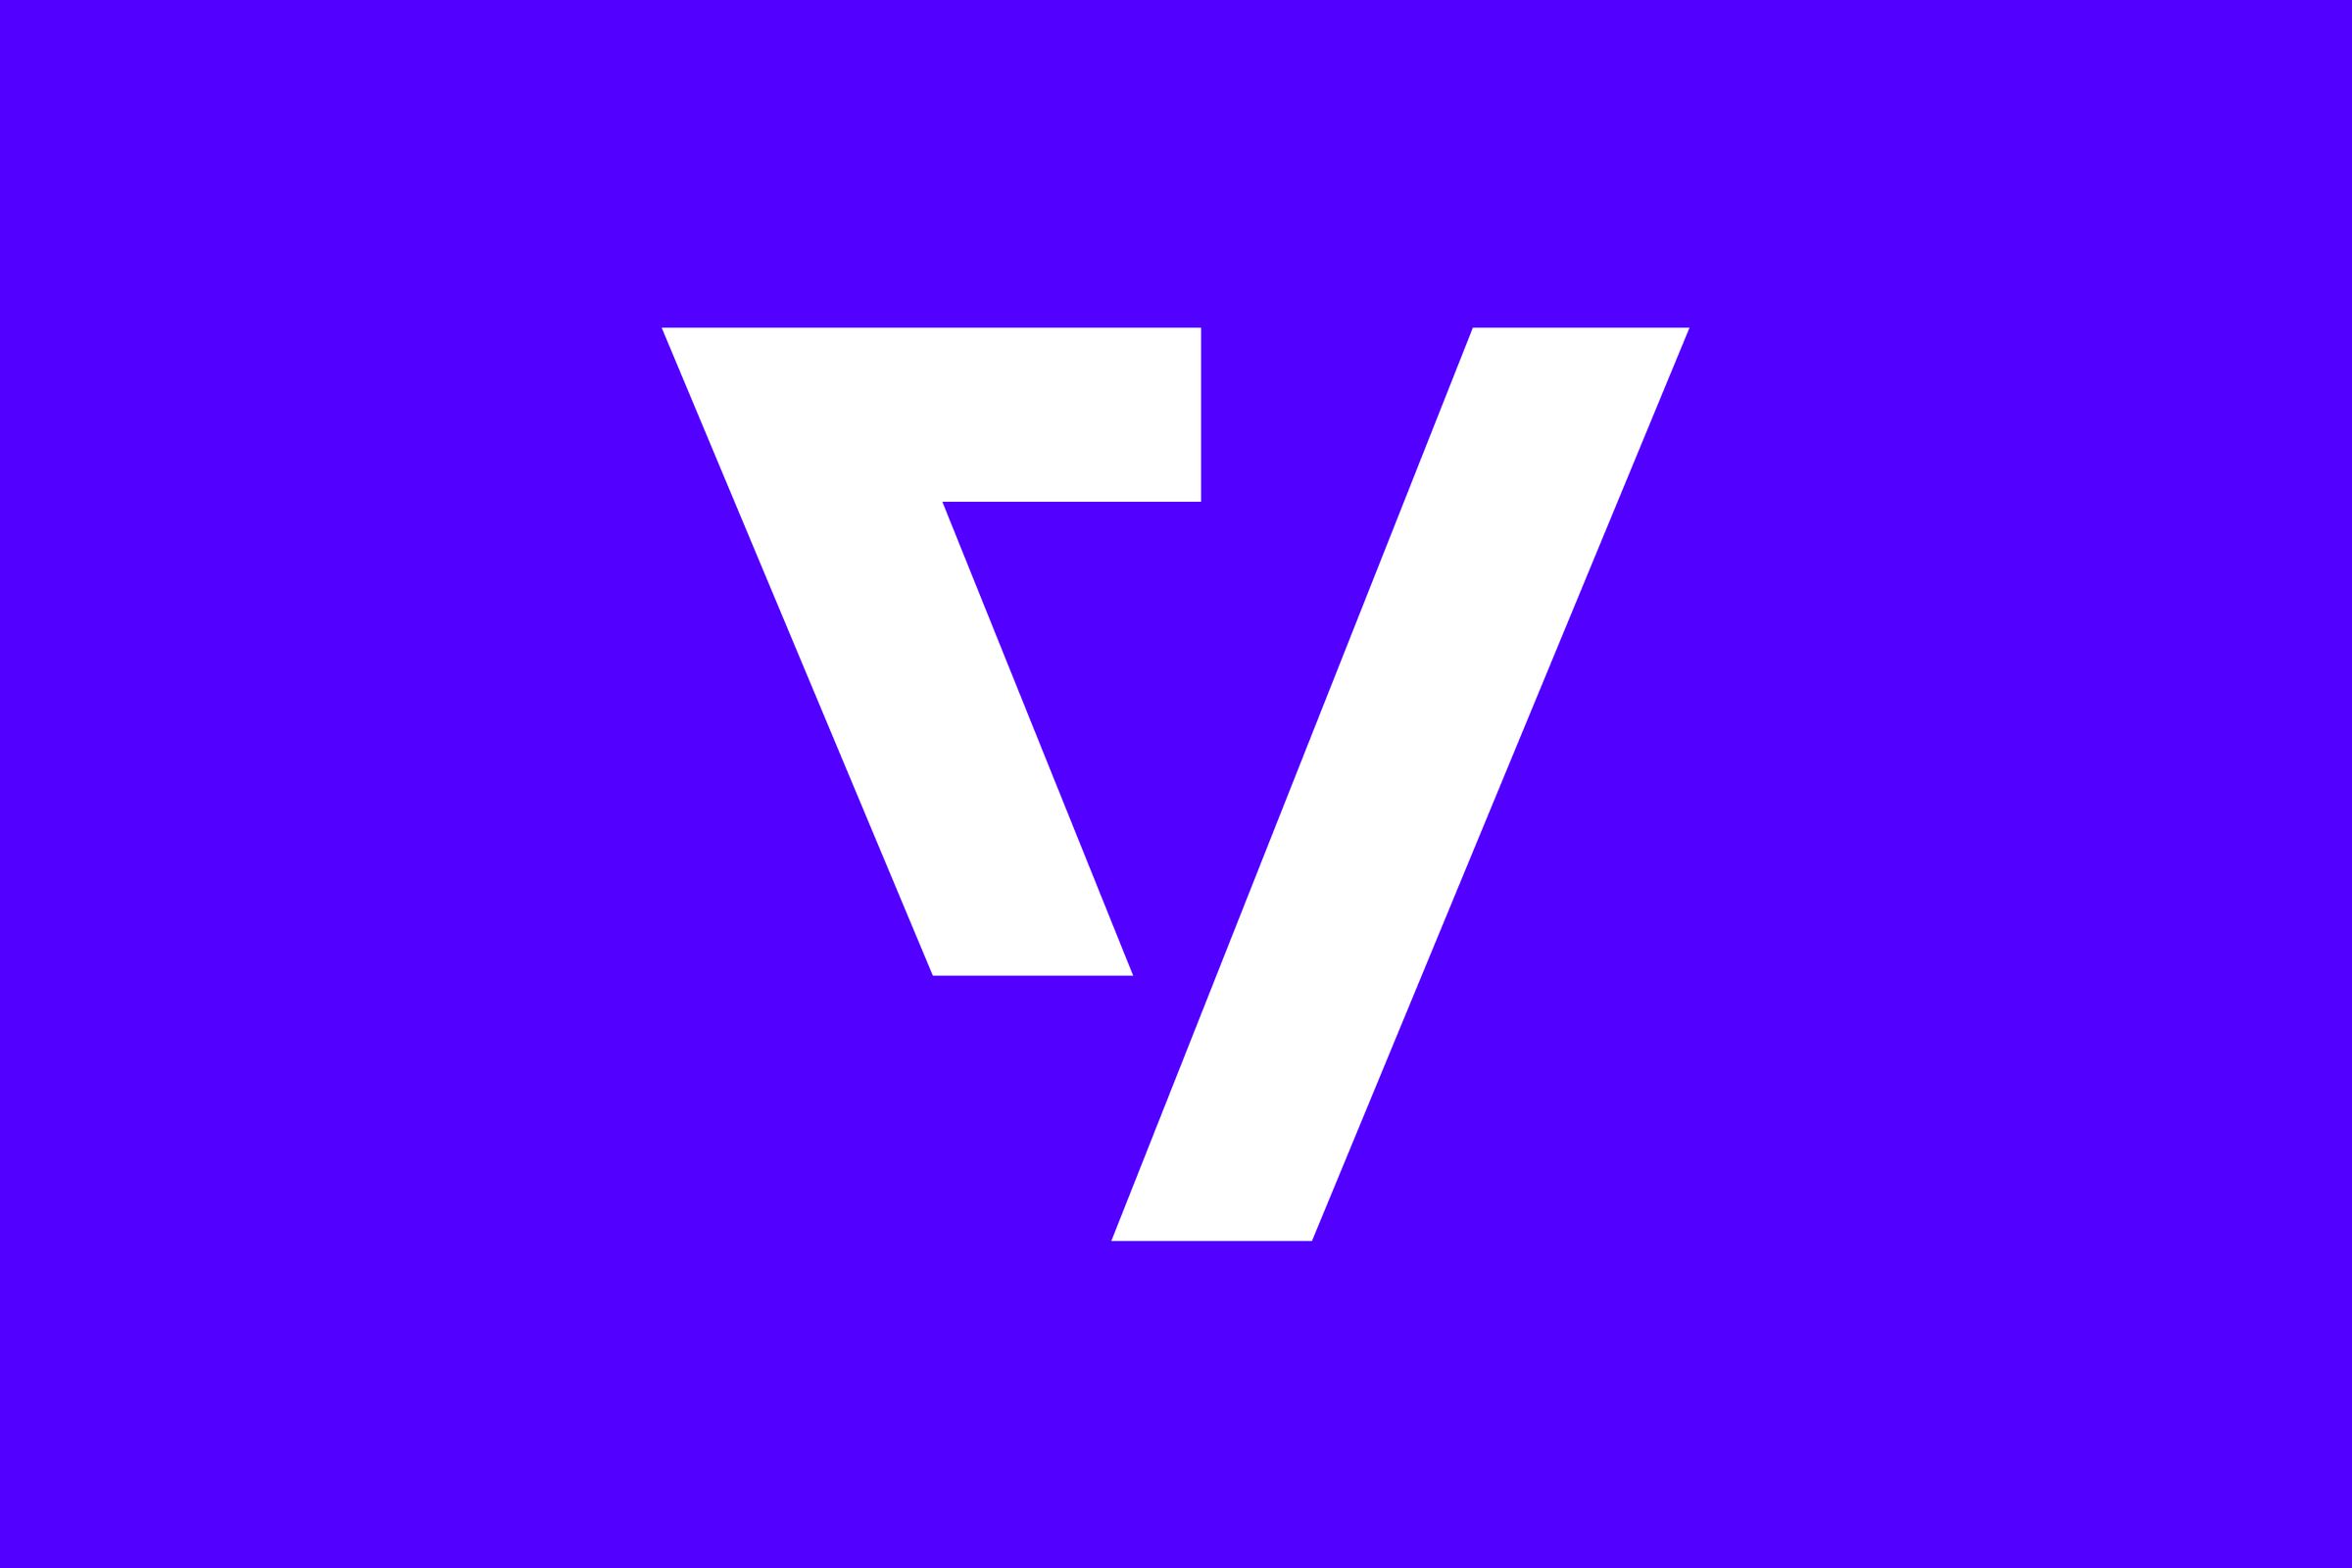 A white version of The Verge’s V monogram logo over a purple background.